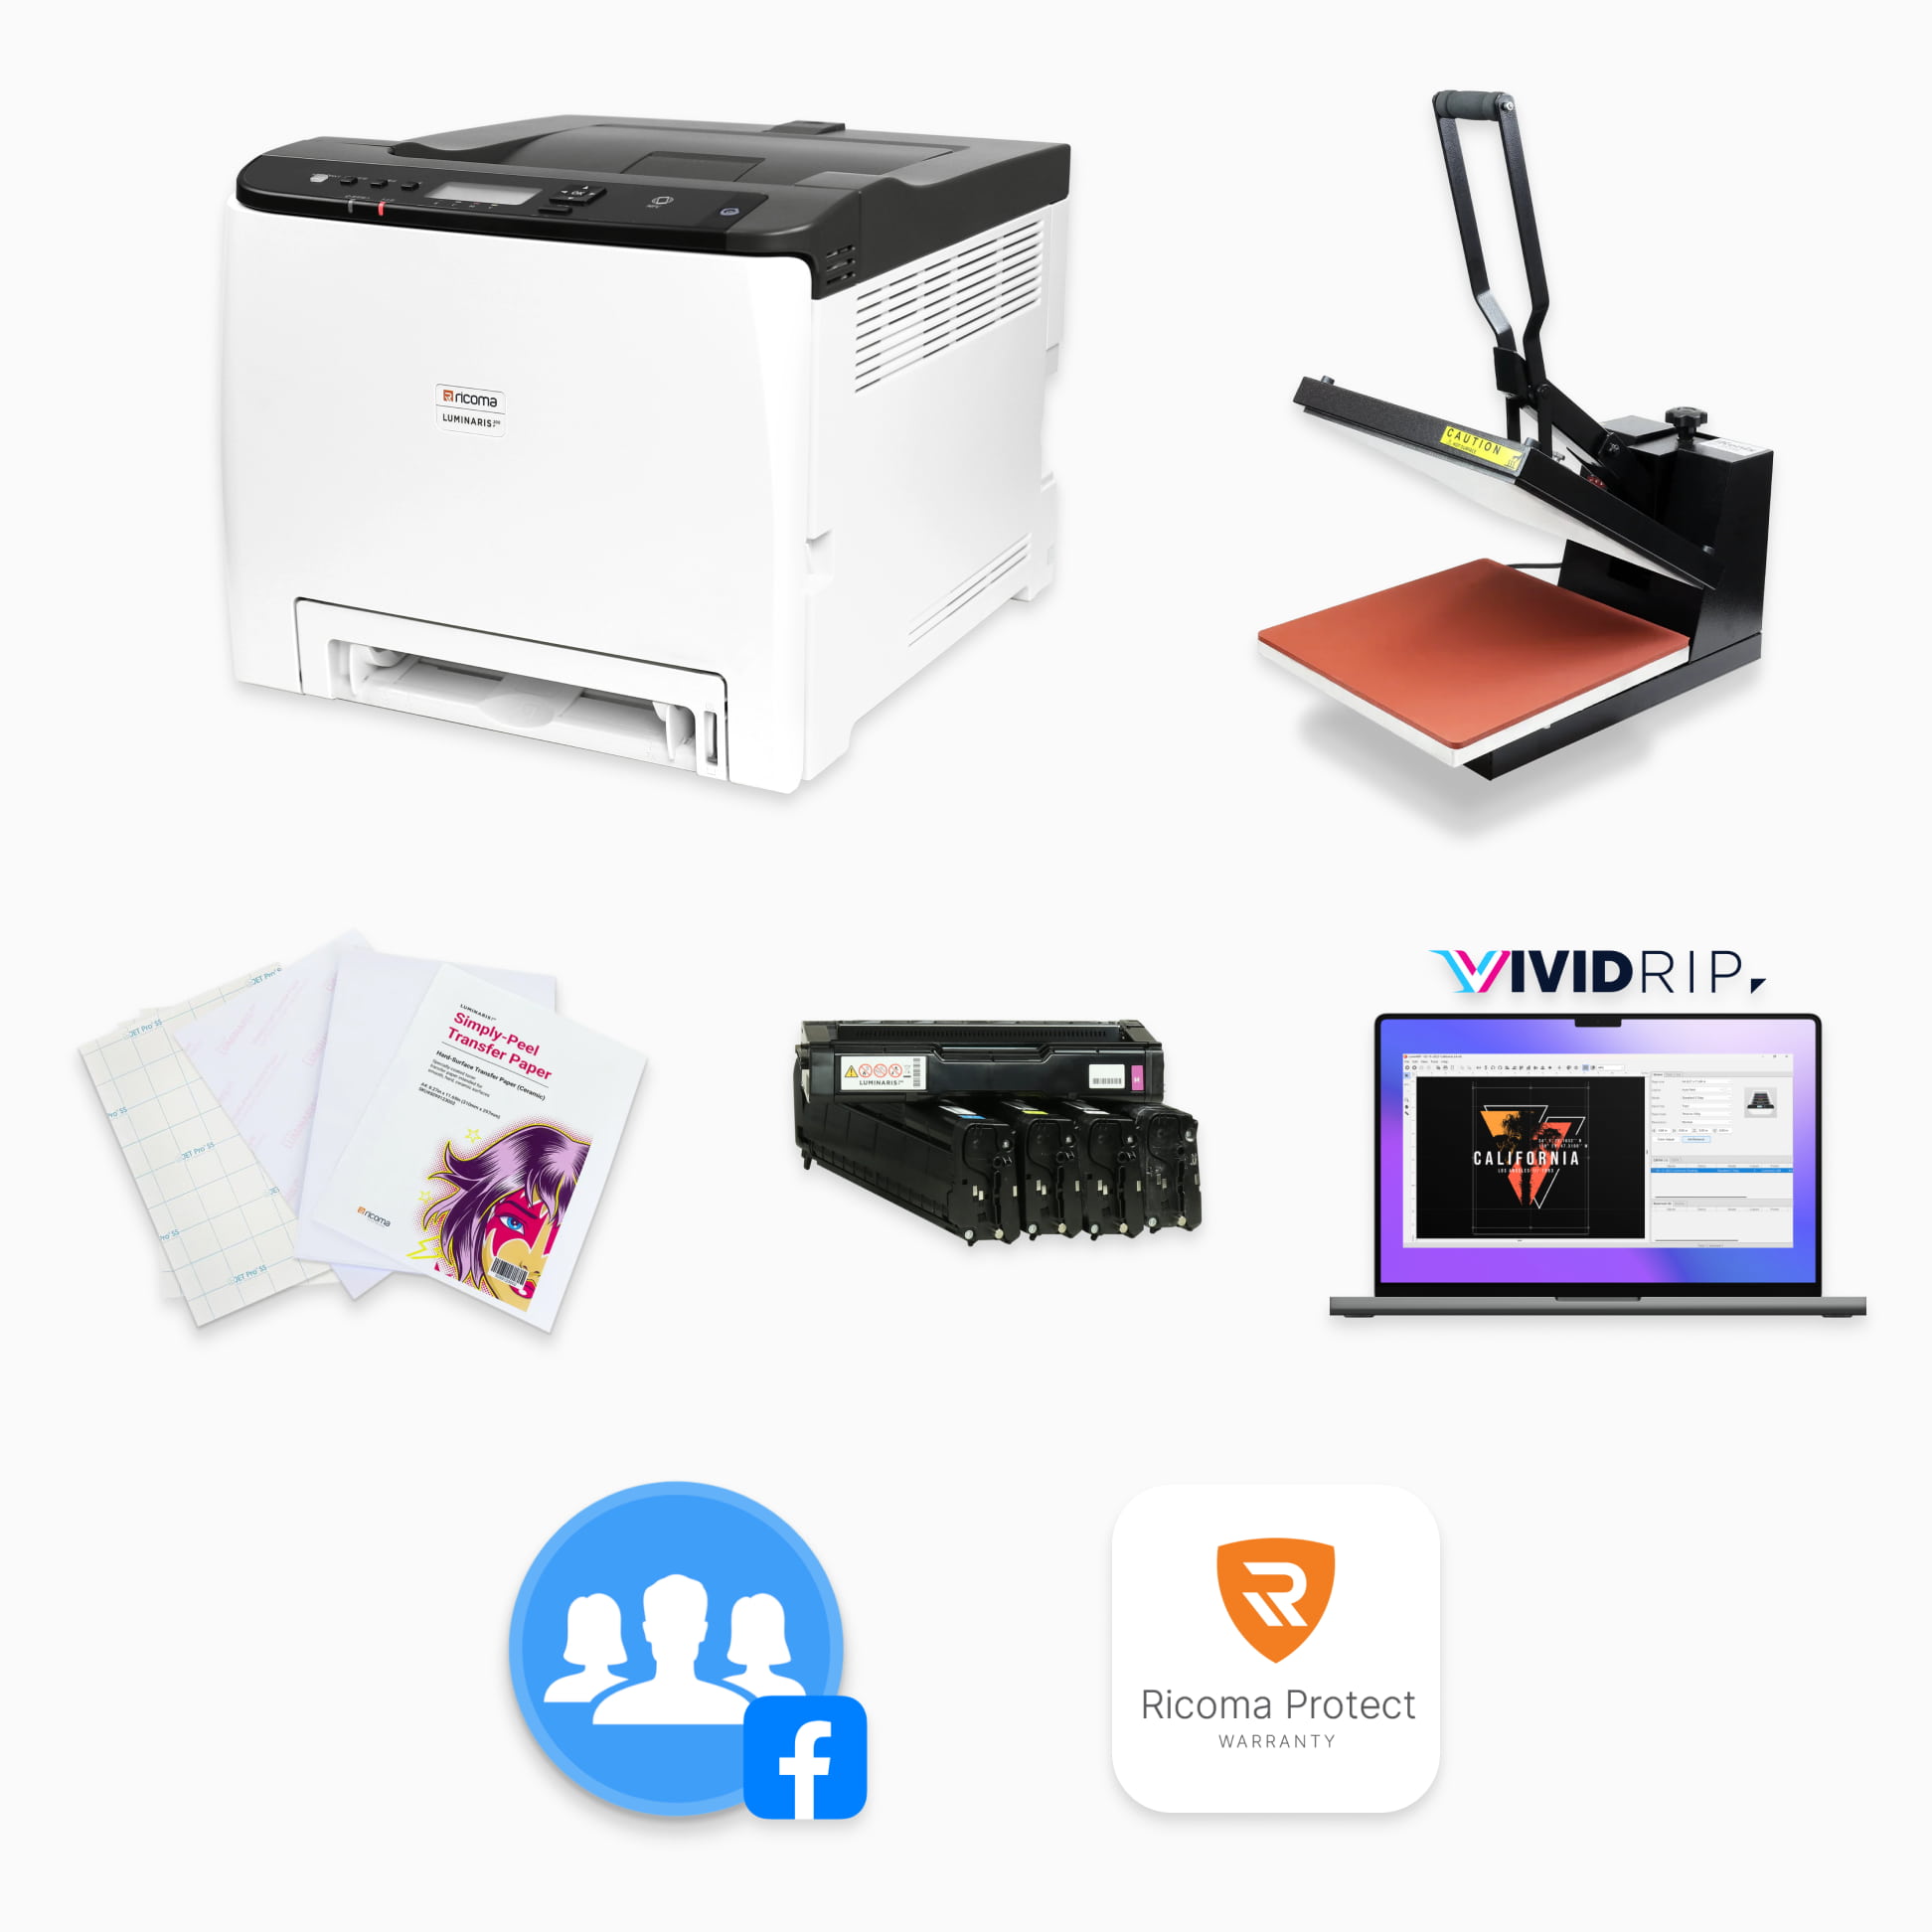 Luminaris 200 White Toner Transfer Printer,iKonix 15” x 15” Flat Heat Press,100 sheets of 2-step transfer paper,Set of transfer toner CMYKW,VividRIP Software (Mac and PC compatible),Access to the private elite Ricoma Facebook group (with over 6,000 members)